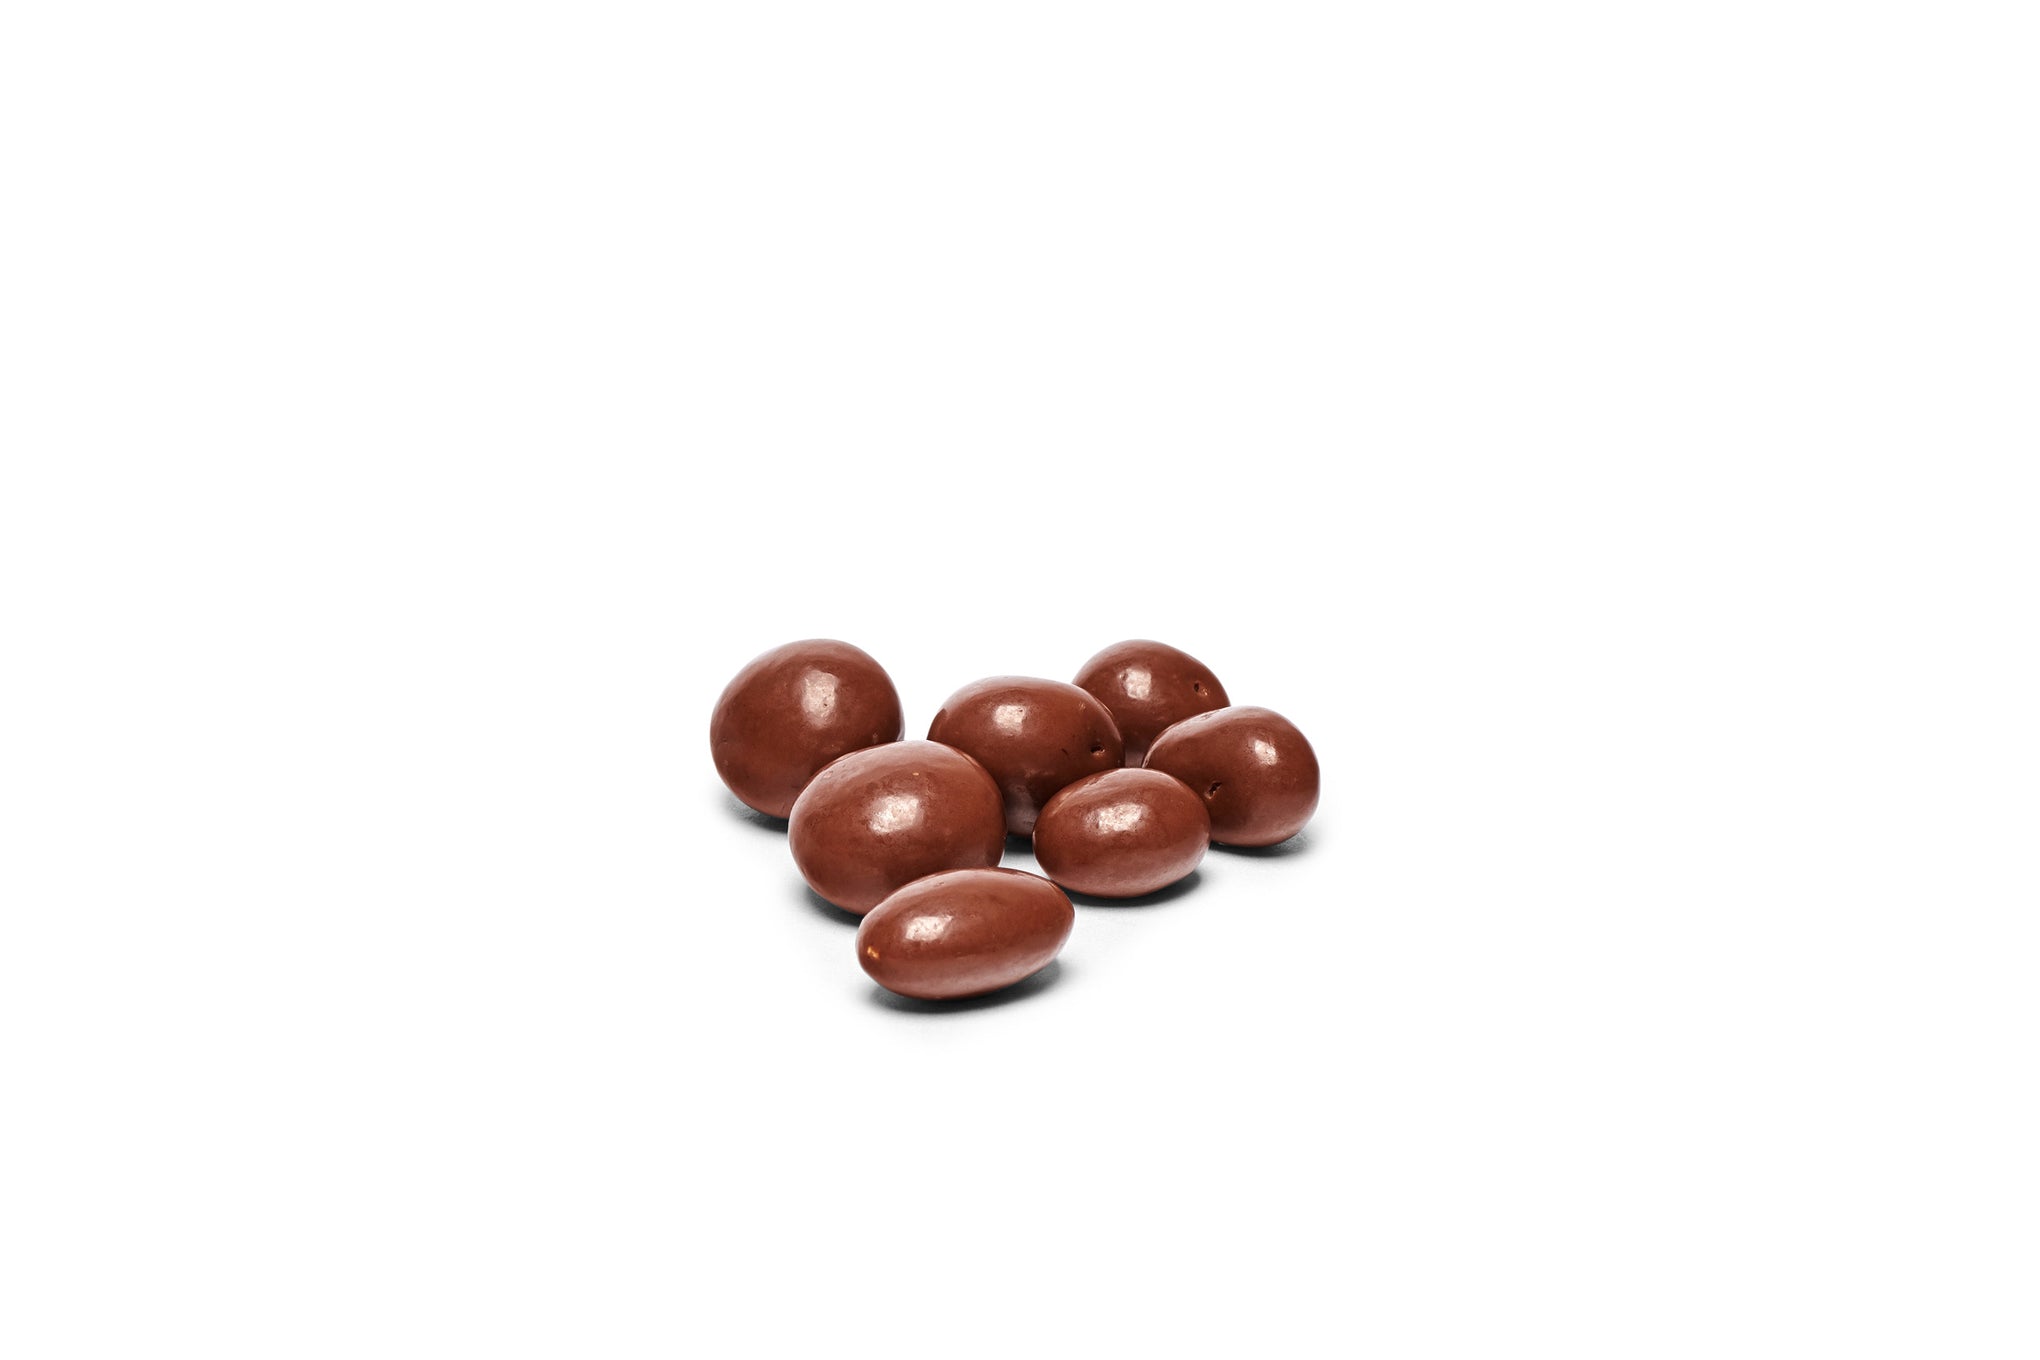 Chocolate drops scattered together